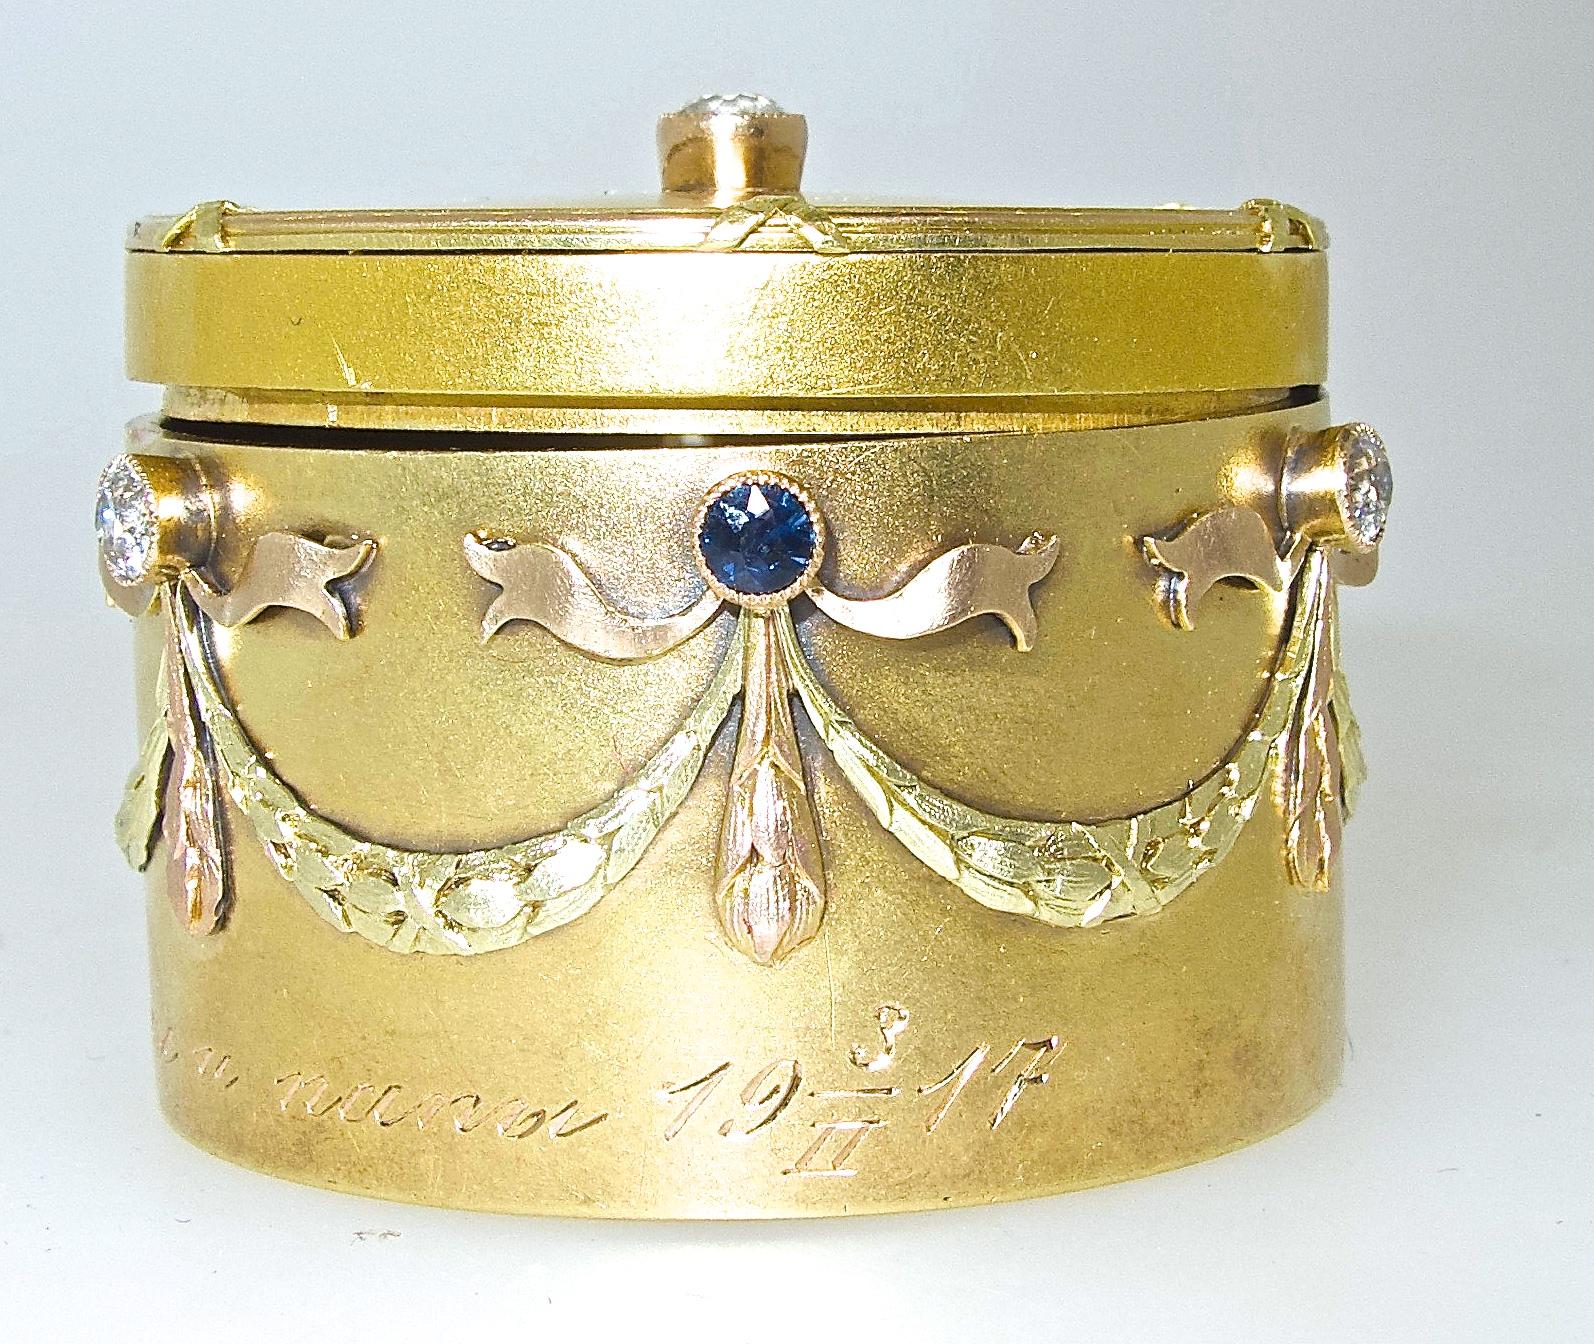 Russian tried color gold, with a satin like finish, small box inscribed Merry Christmas from Mom and dad 1917, with old cut diamonds, estimate ti weigh .85 cts., and 3 round natural blue sapphires.  Numbered and with Russian hallmarks and the gold